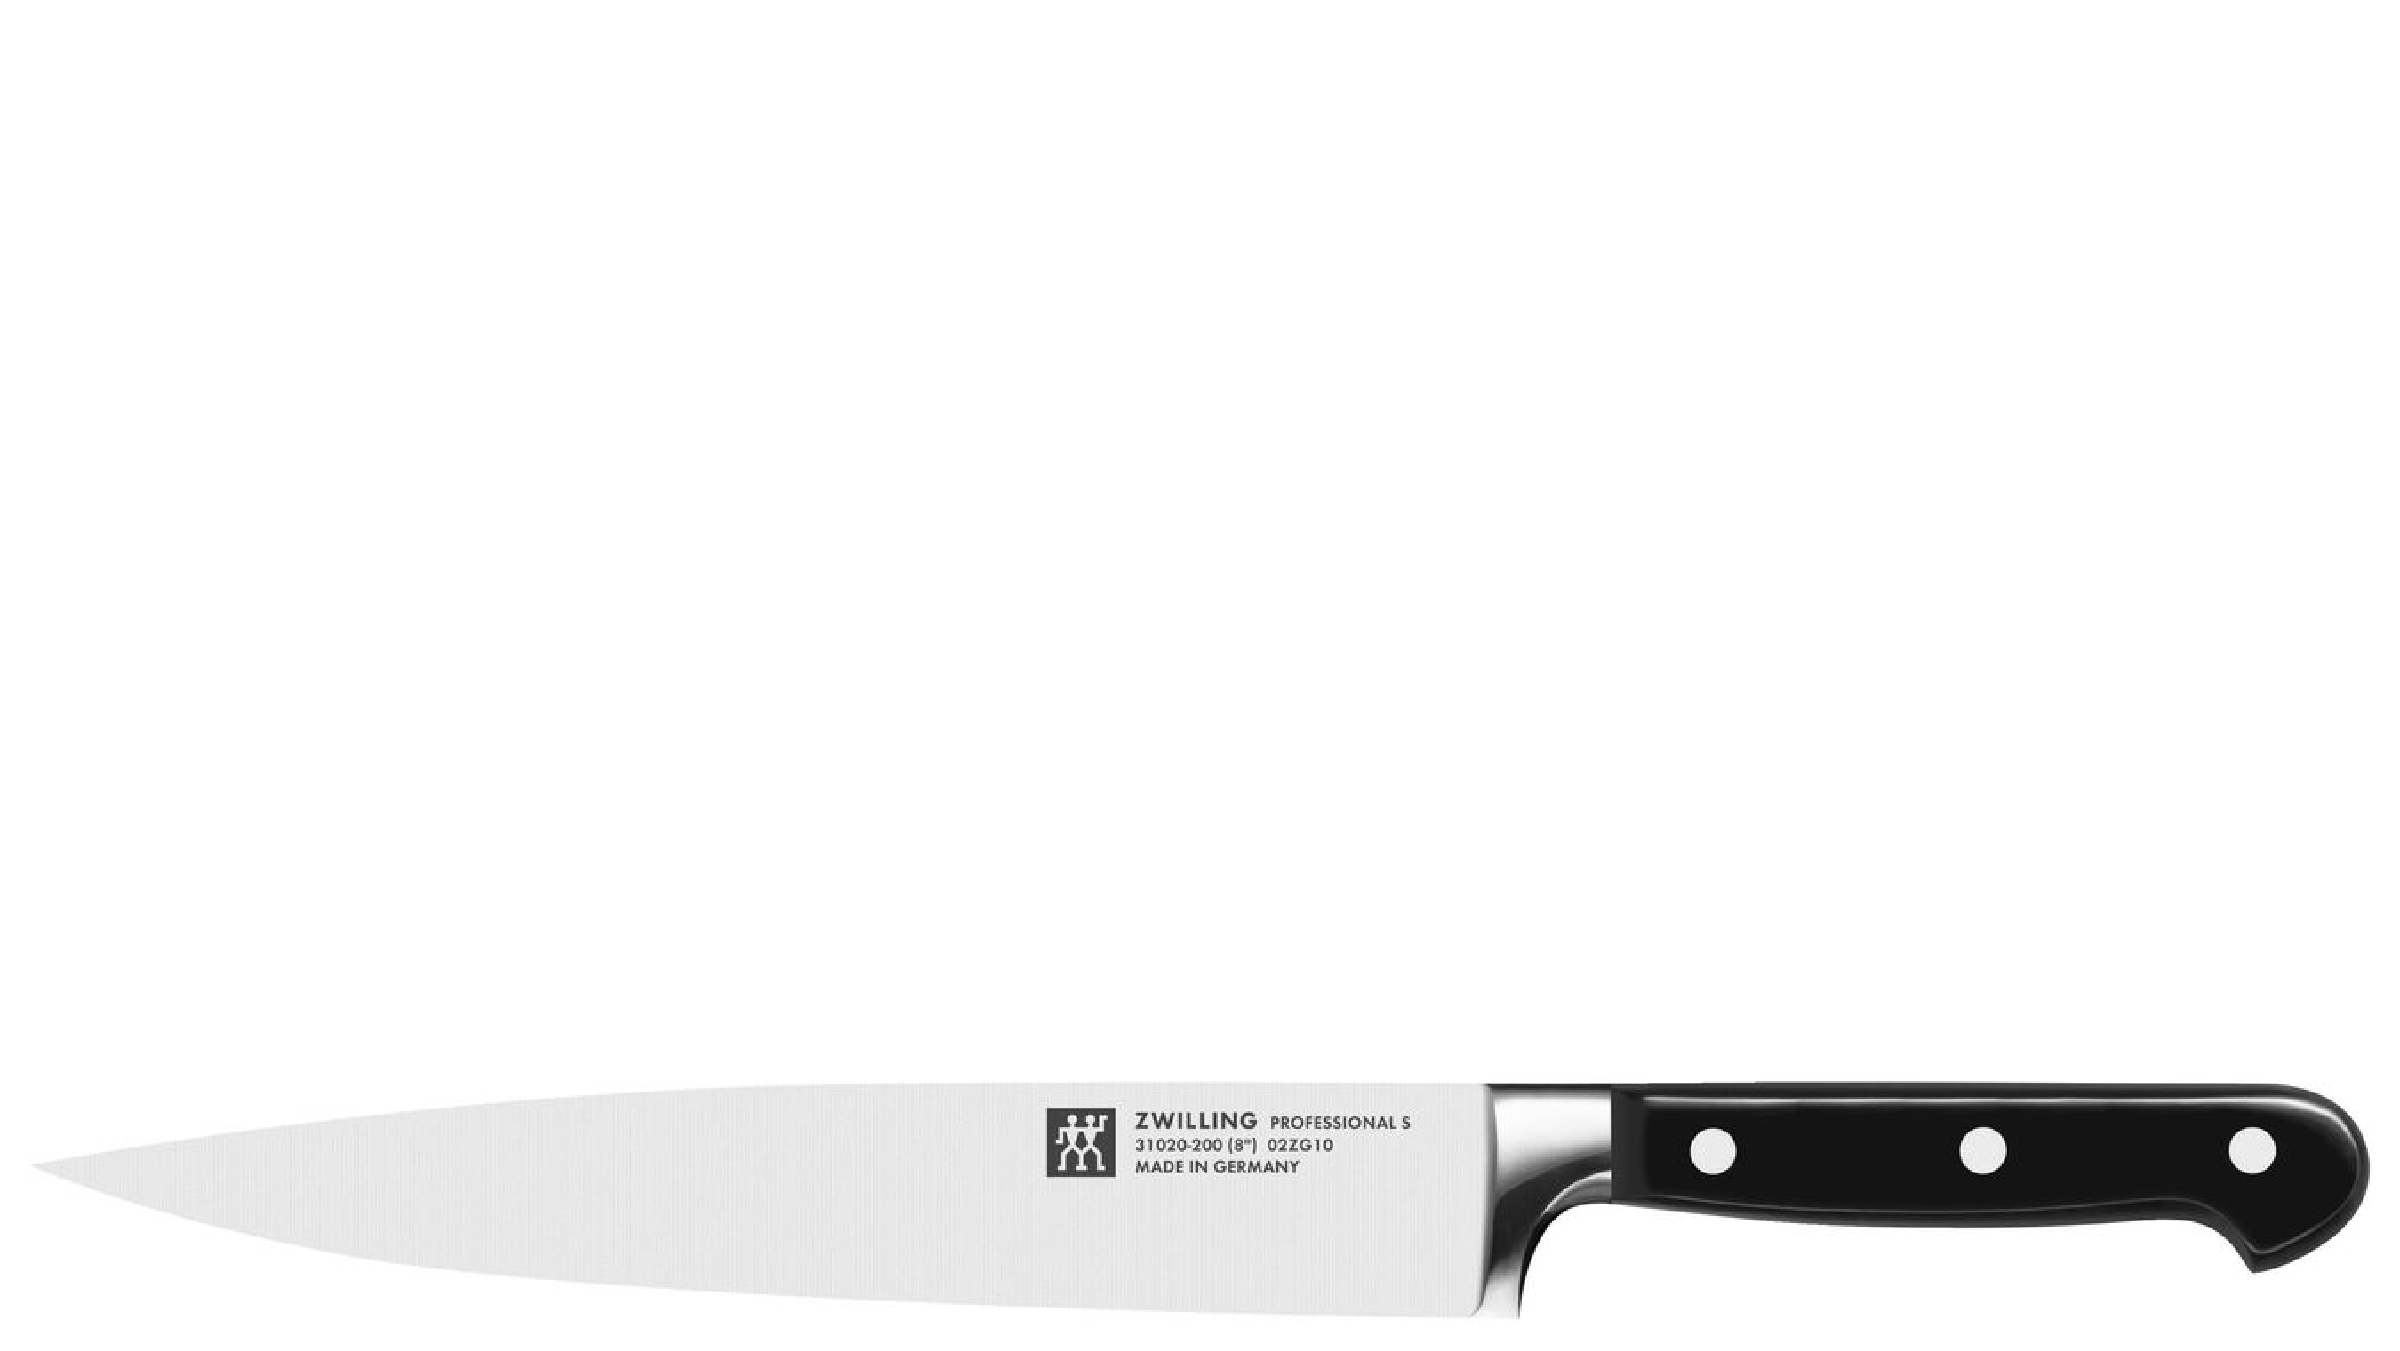 Zwilling Professional S 8-inch, Slicing/Carving Knife